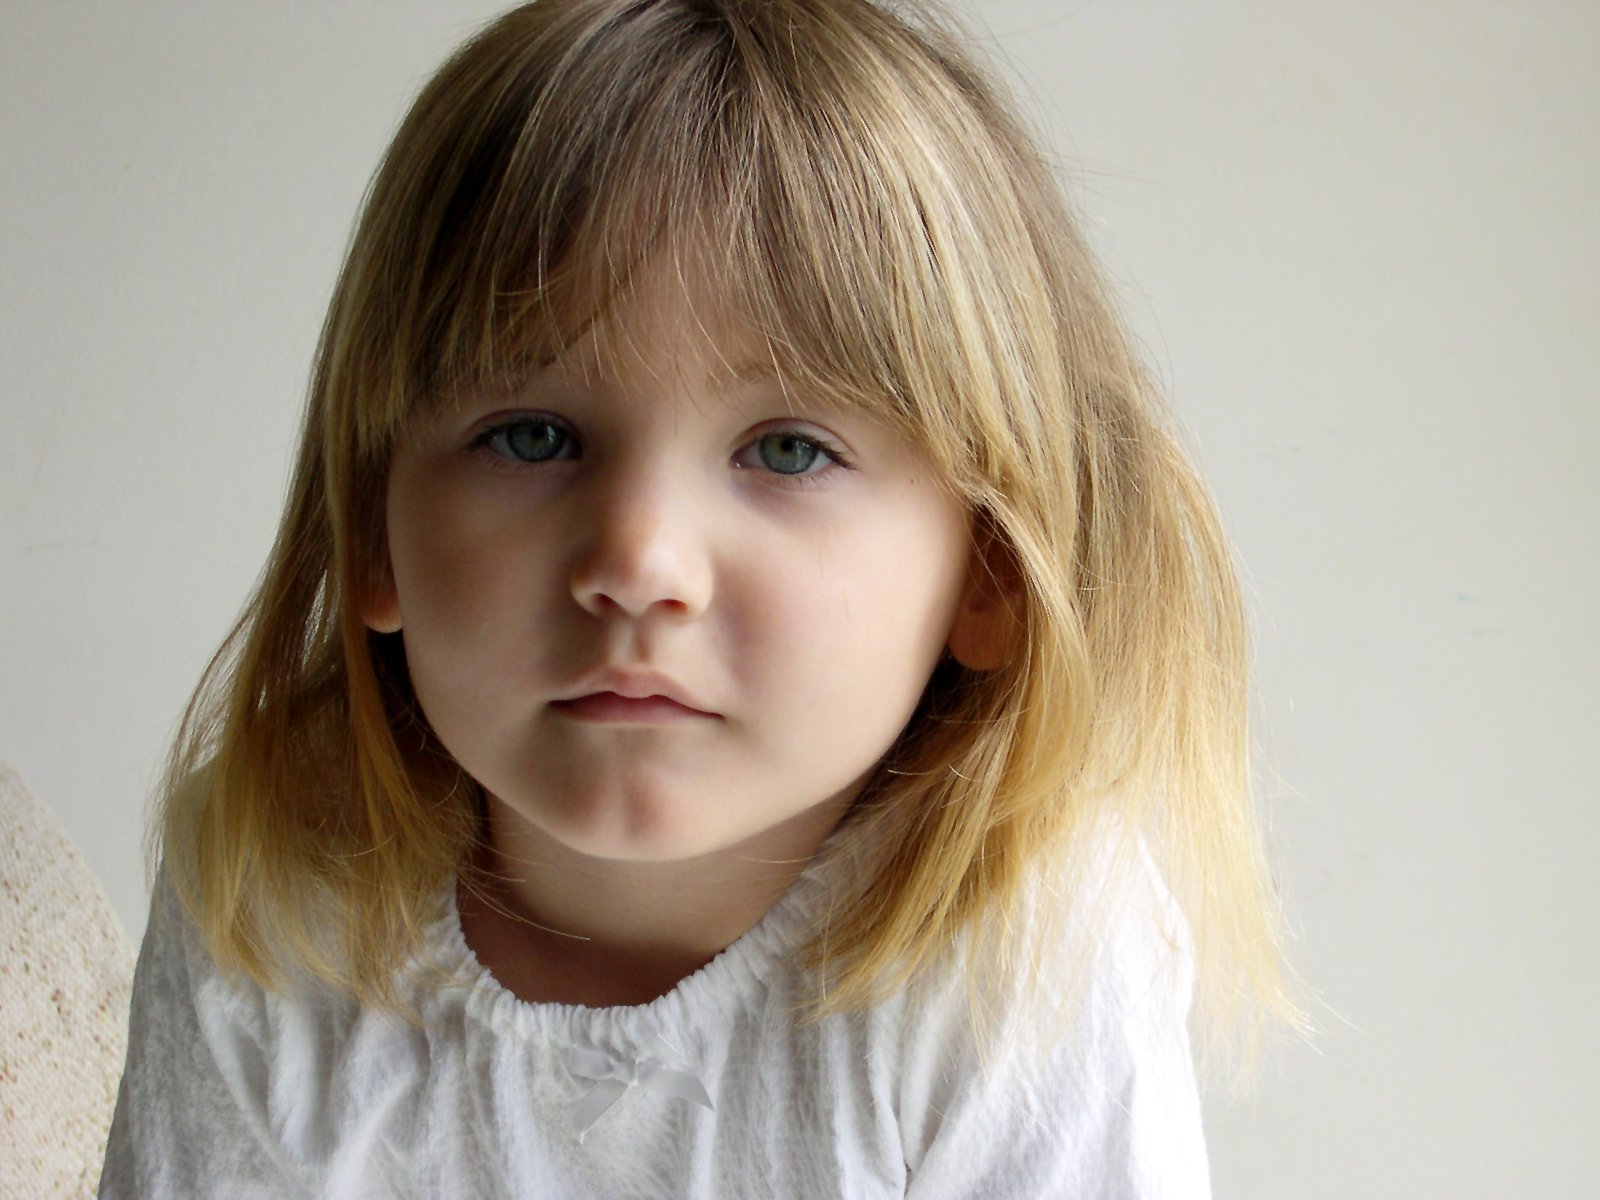 a close up po of a small child with blonde hair